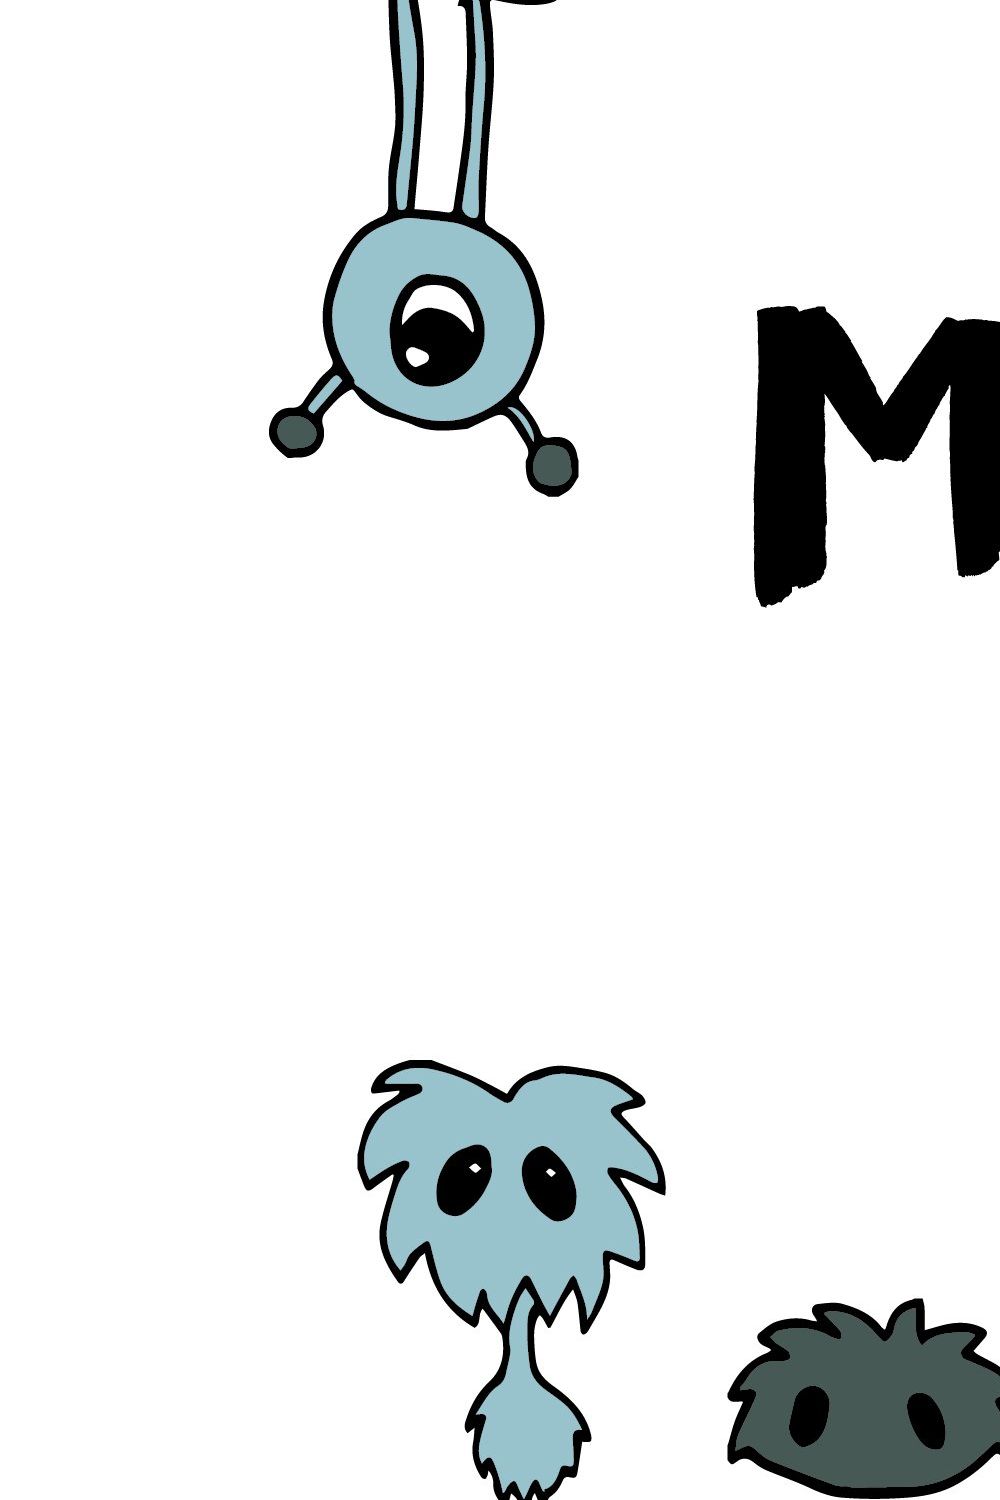 Monsters pinterest preview image.